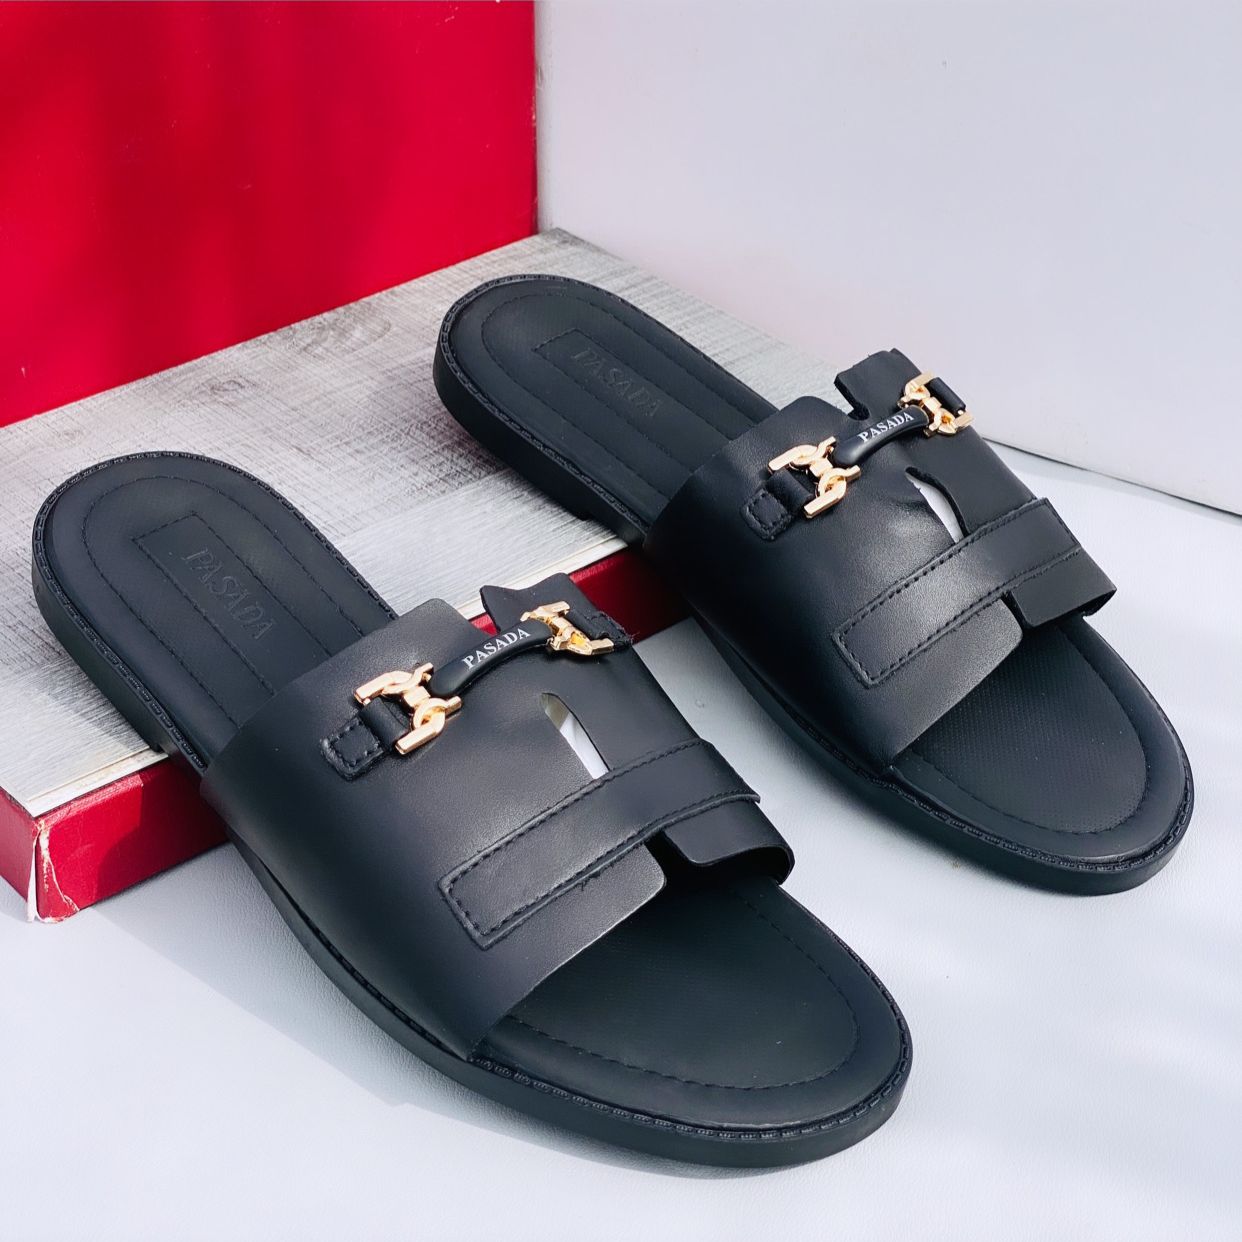 Black Leather Slippers | Buy Online At The Best Price In Accra